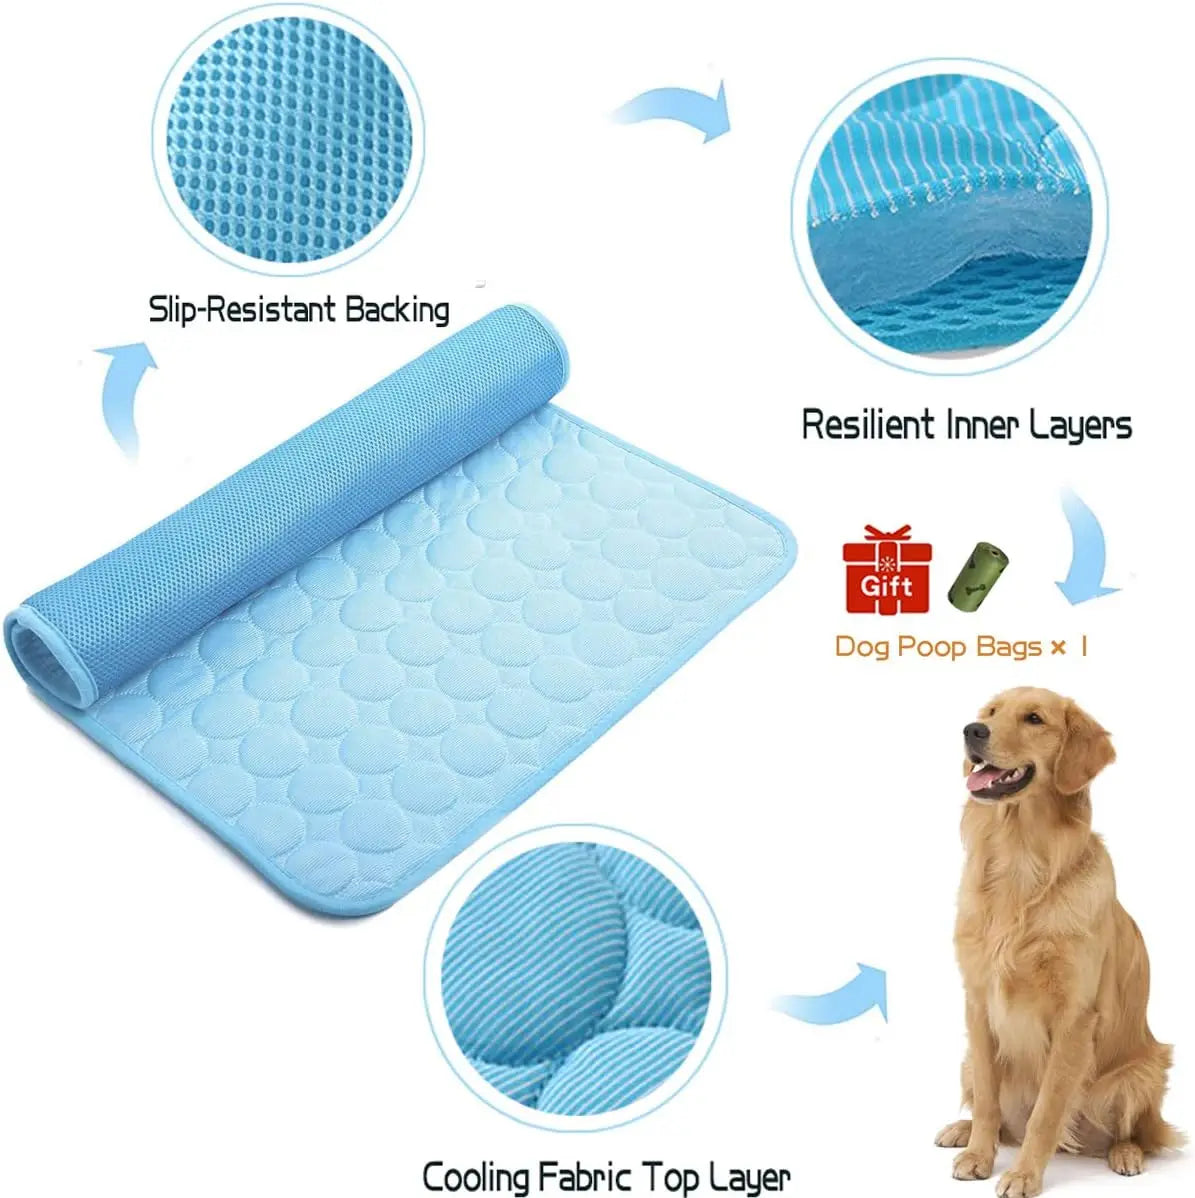 Safe, Portable, Cooling Pads for All